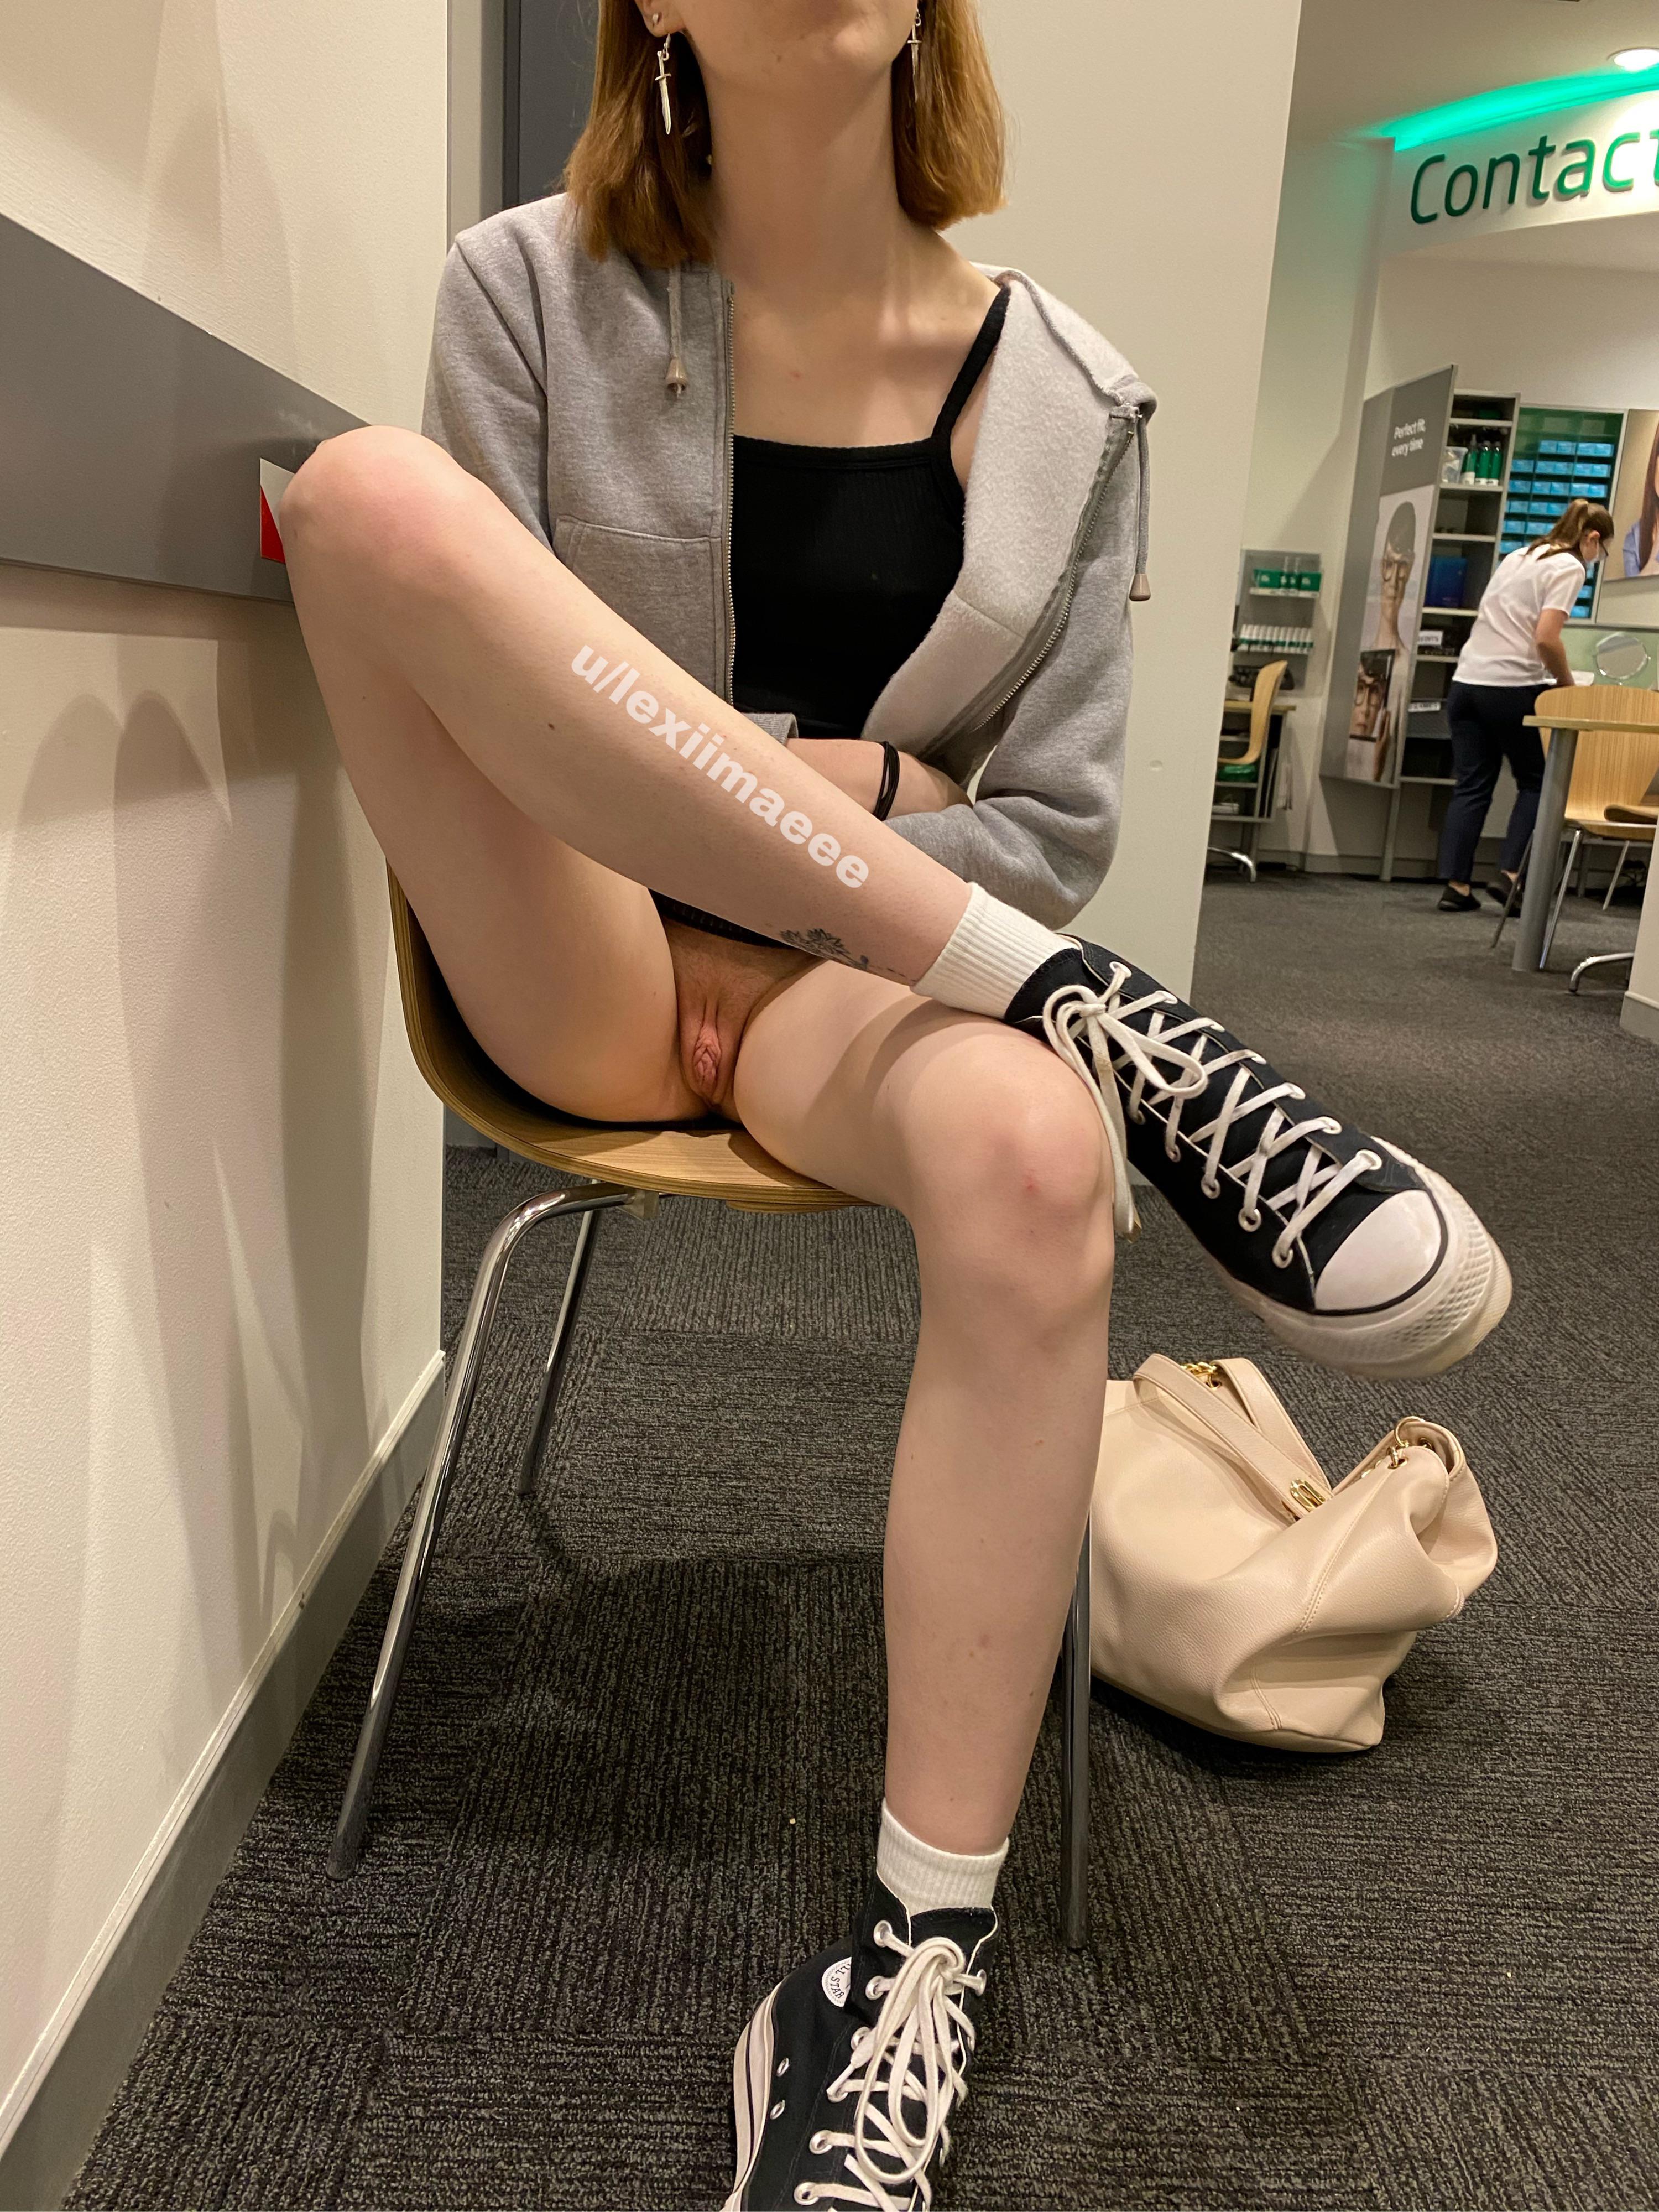 Cum Dripping Panties In Public - Converses and no panties in public = the best combo